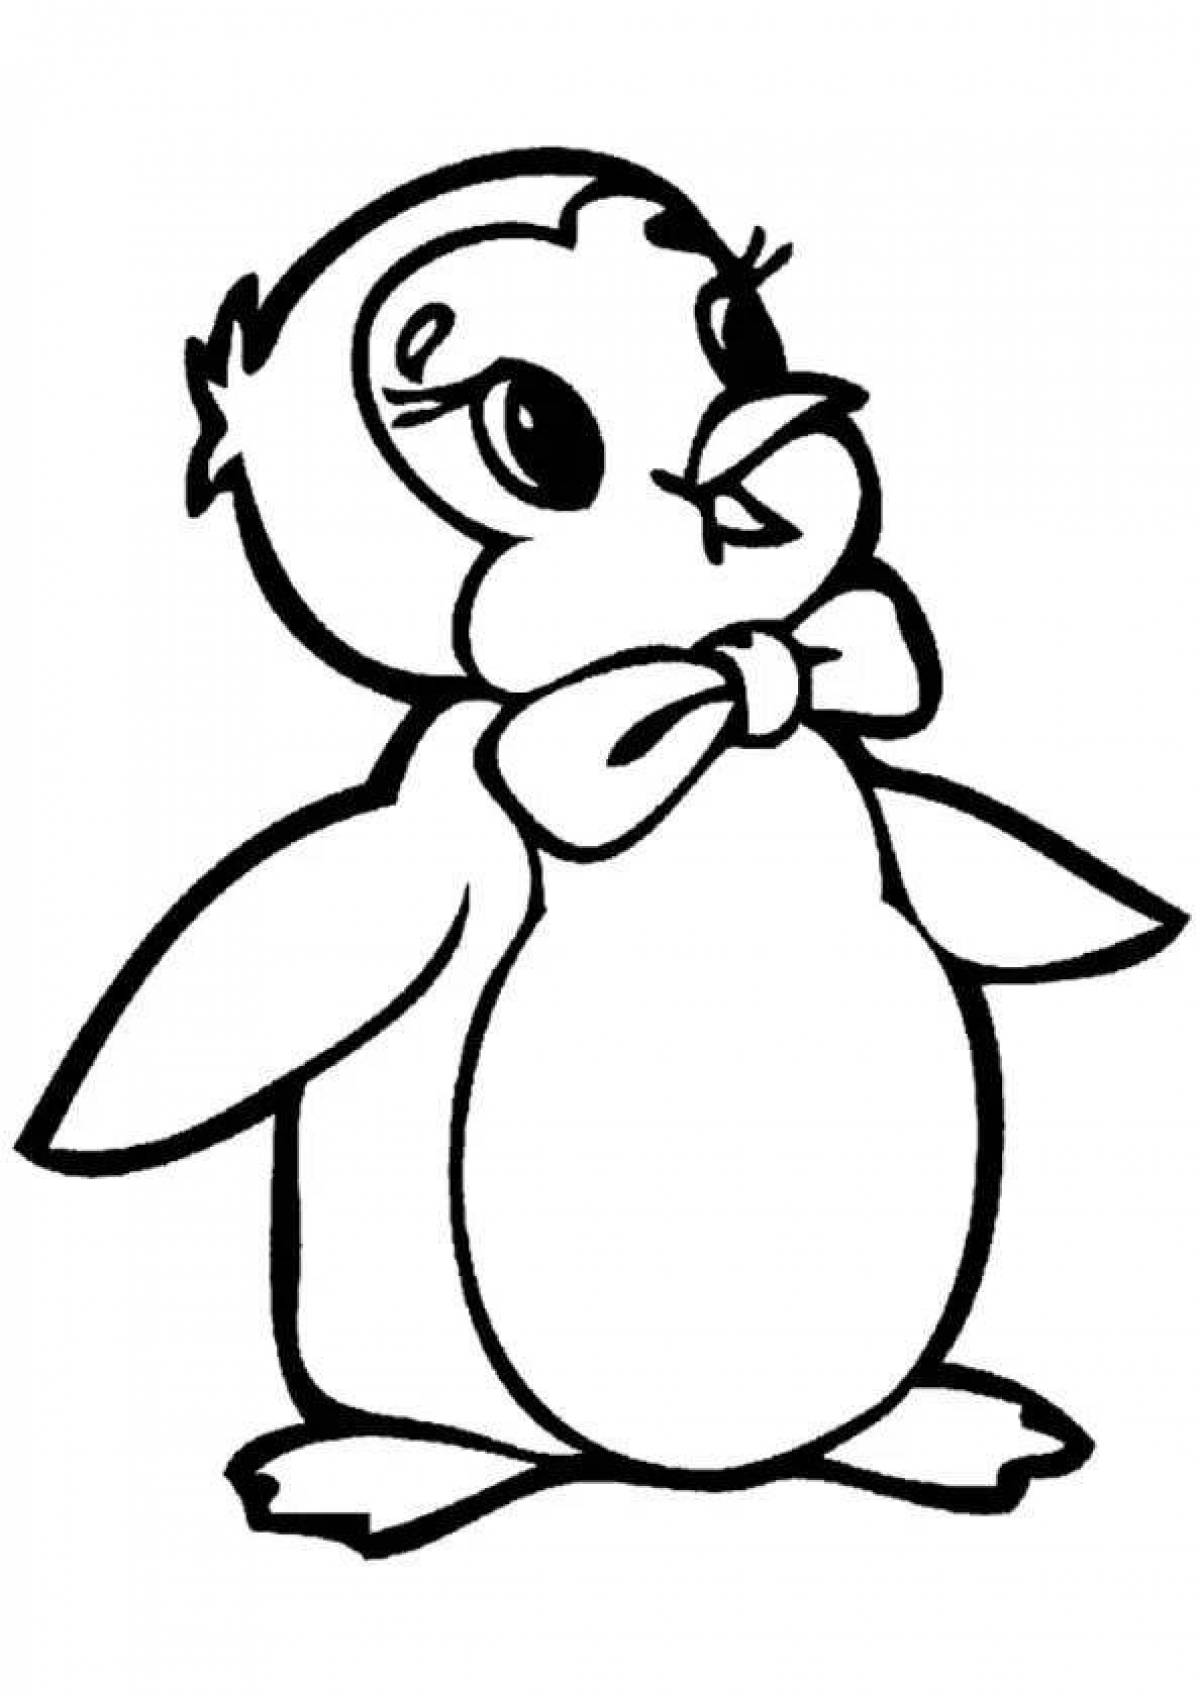 Outstanding penguin coloring pages